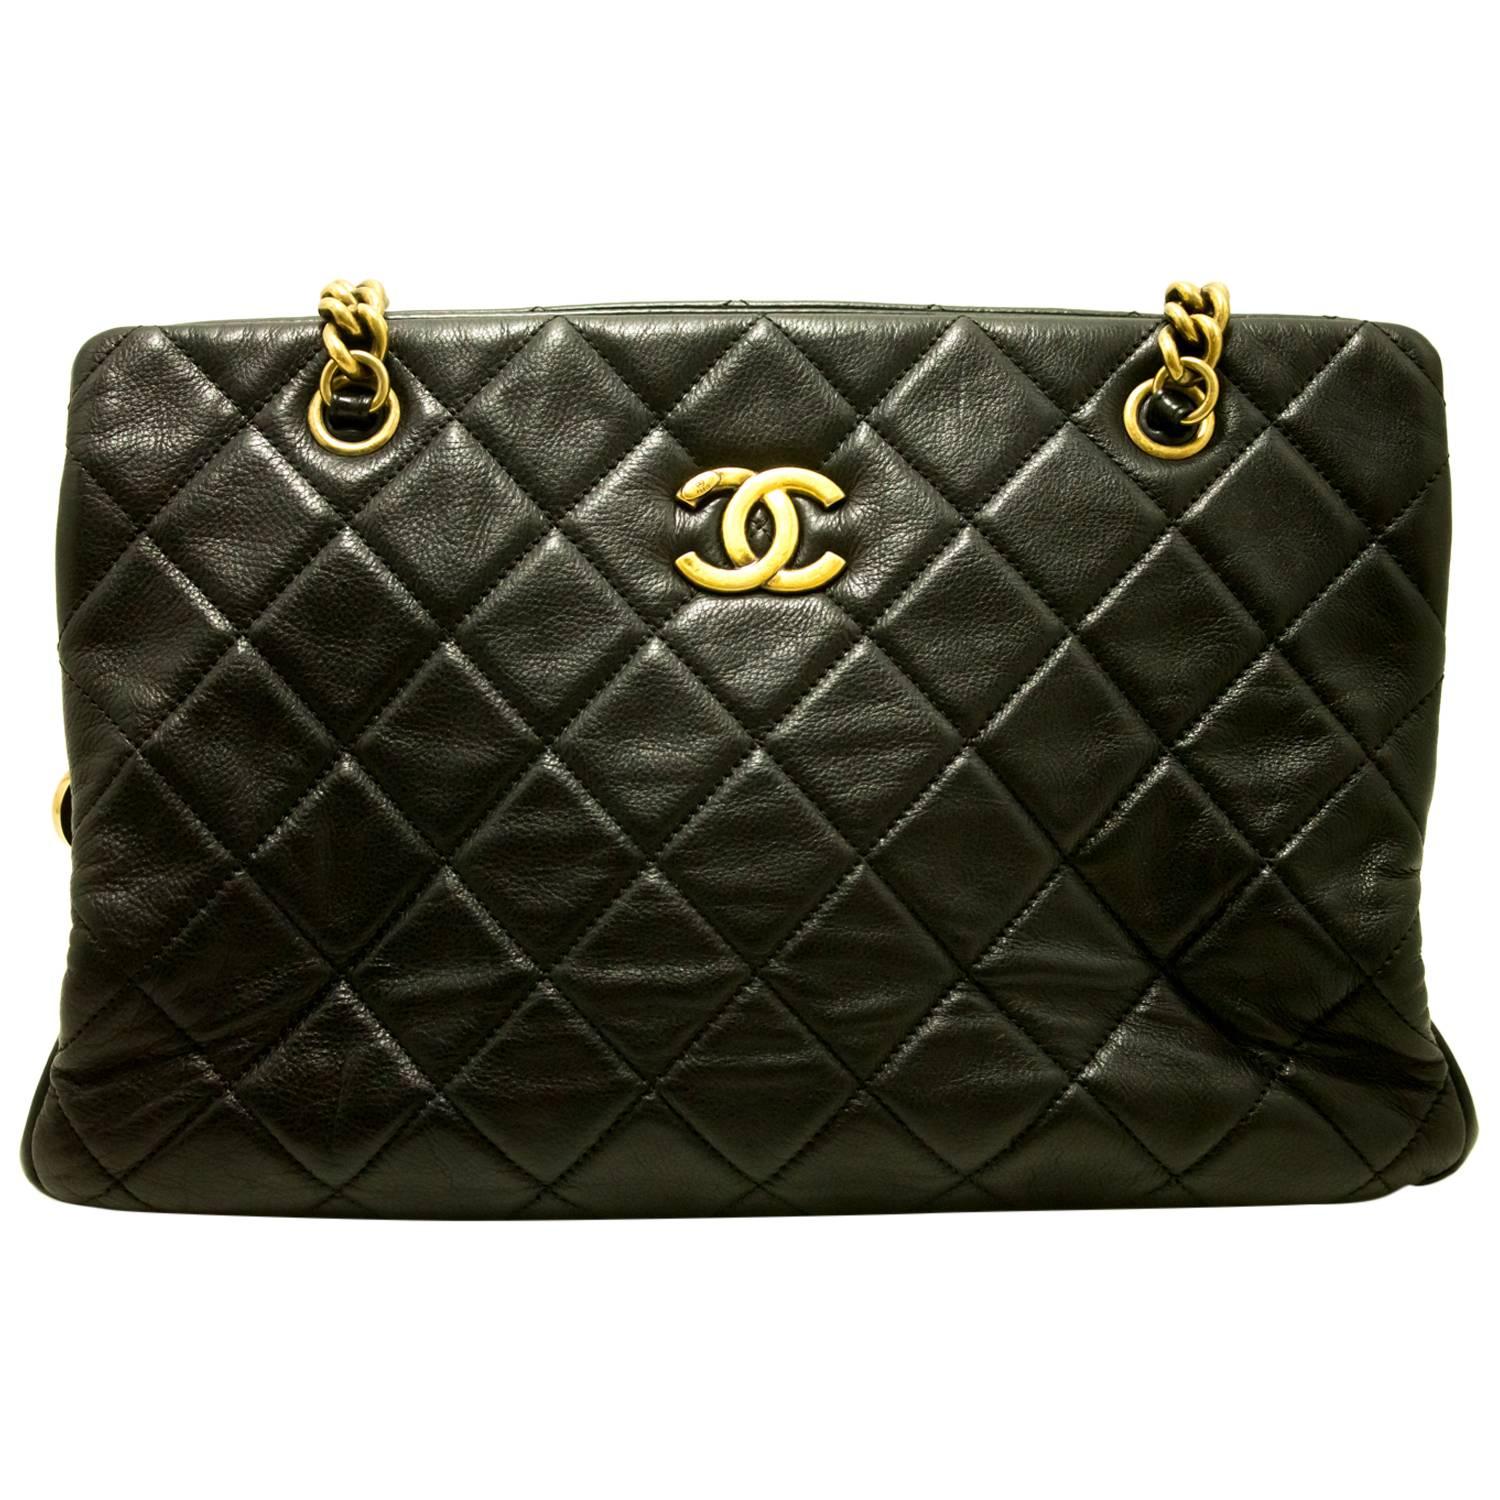 Authentic CHANEL Calfskin 2012 Antique Gold Chain Shoulder Bag Black Quilted f17